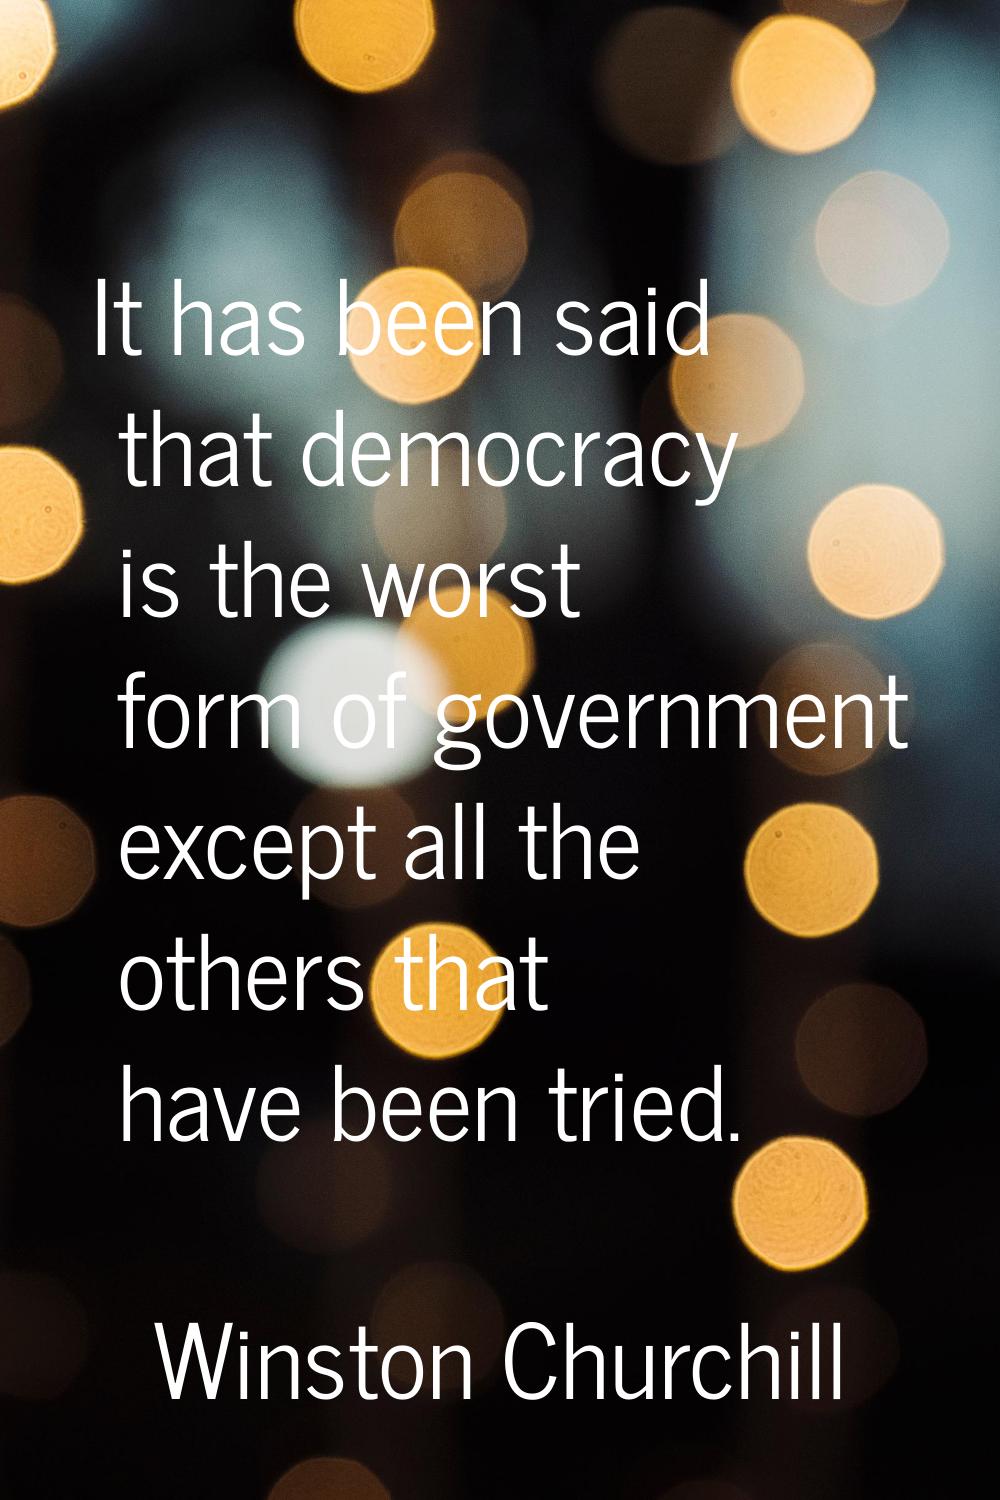 It has been said that democracy is the worst form of government except all the others that have bee